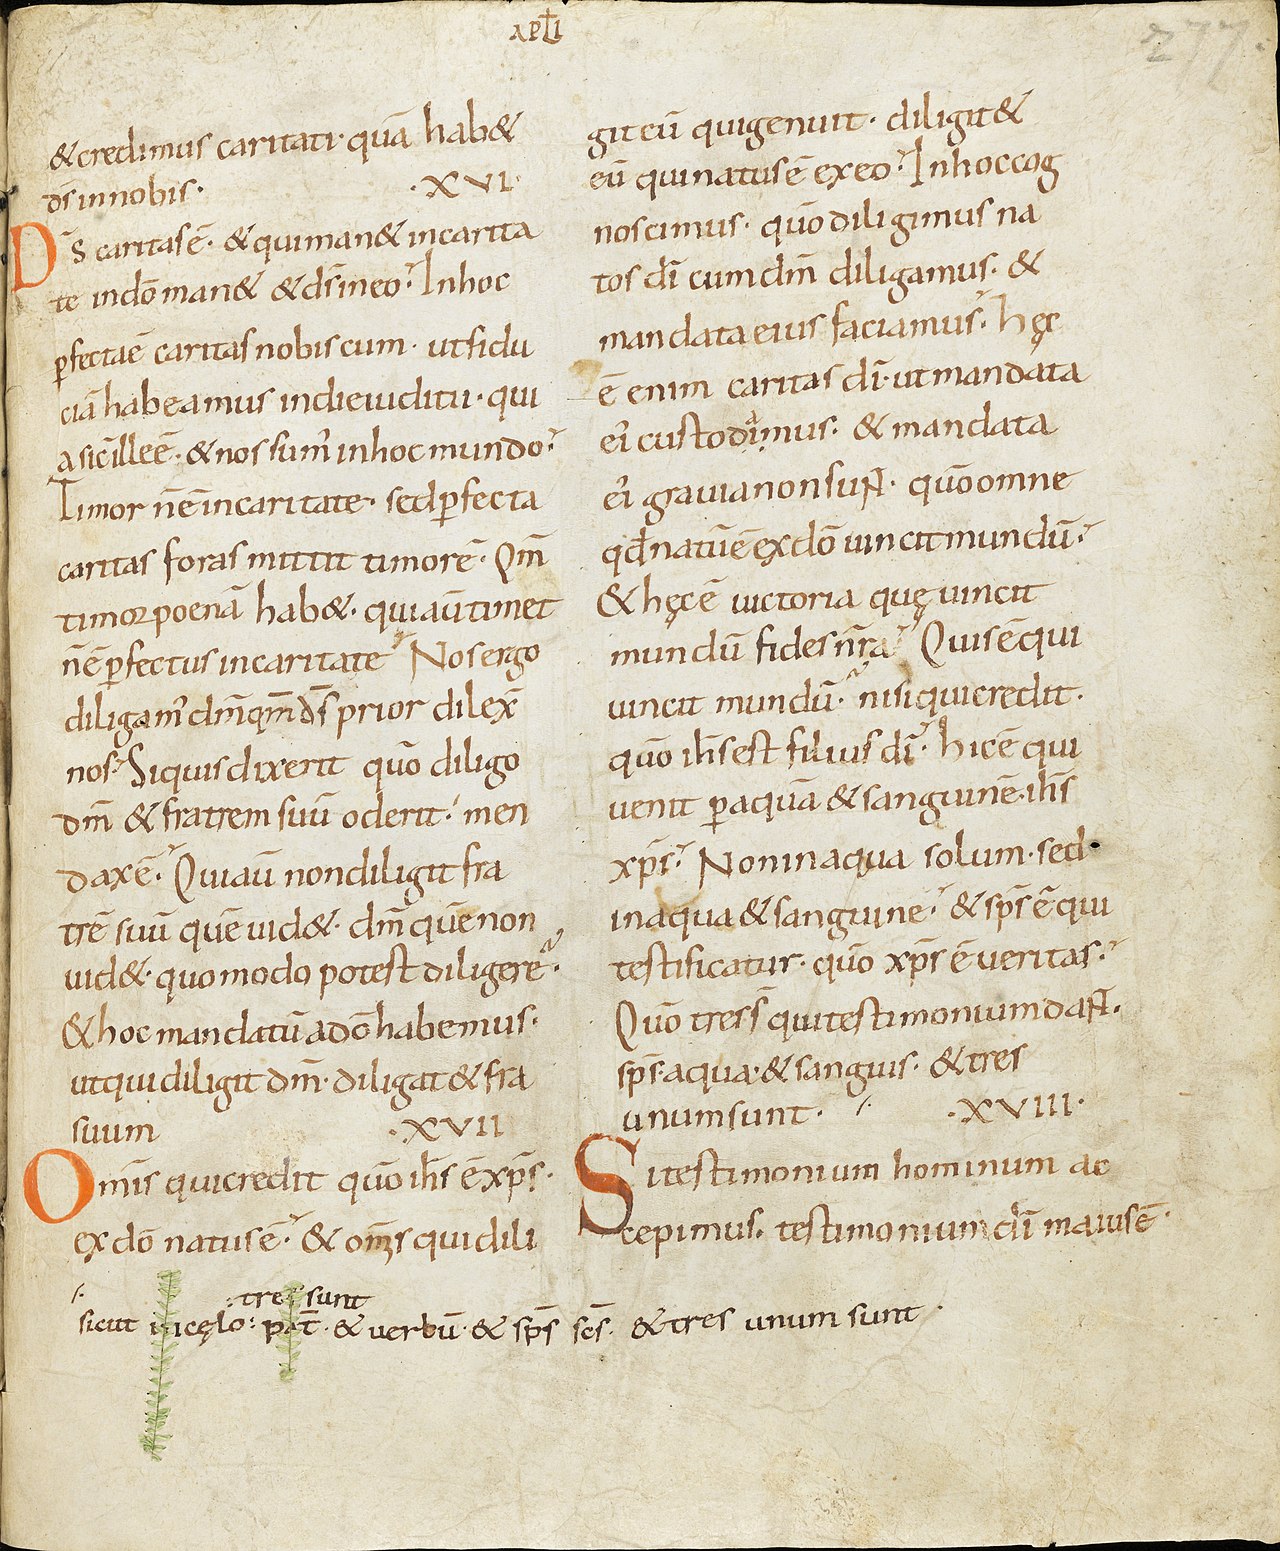 VaultNote(name='Codex Sangallensis.jpg', relative_path='Attachments/Codex Sangallensis.jpg', source_path='/Users/boris/Notes/Public/Attachments/Codex Sangallensis.jpg', is_asset=True, modified_time=1615315798.0, created_time=1647237326.544503, links=[], transclusions=[], backlinks=[], source_content='', eleventy_content='')